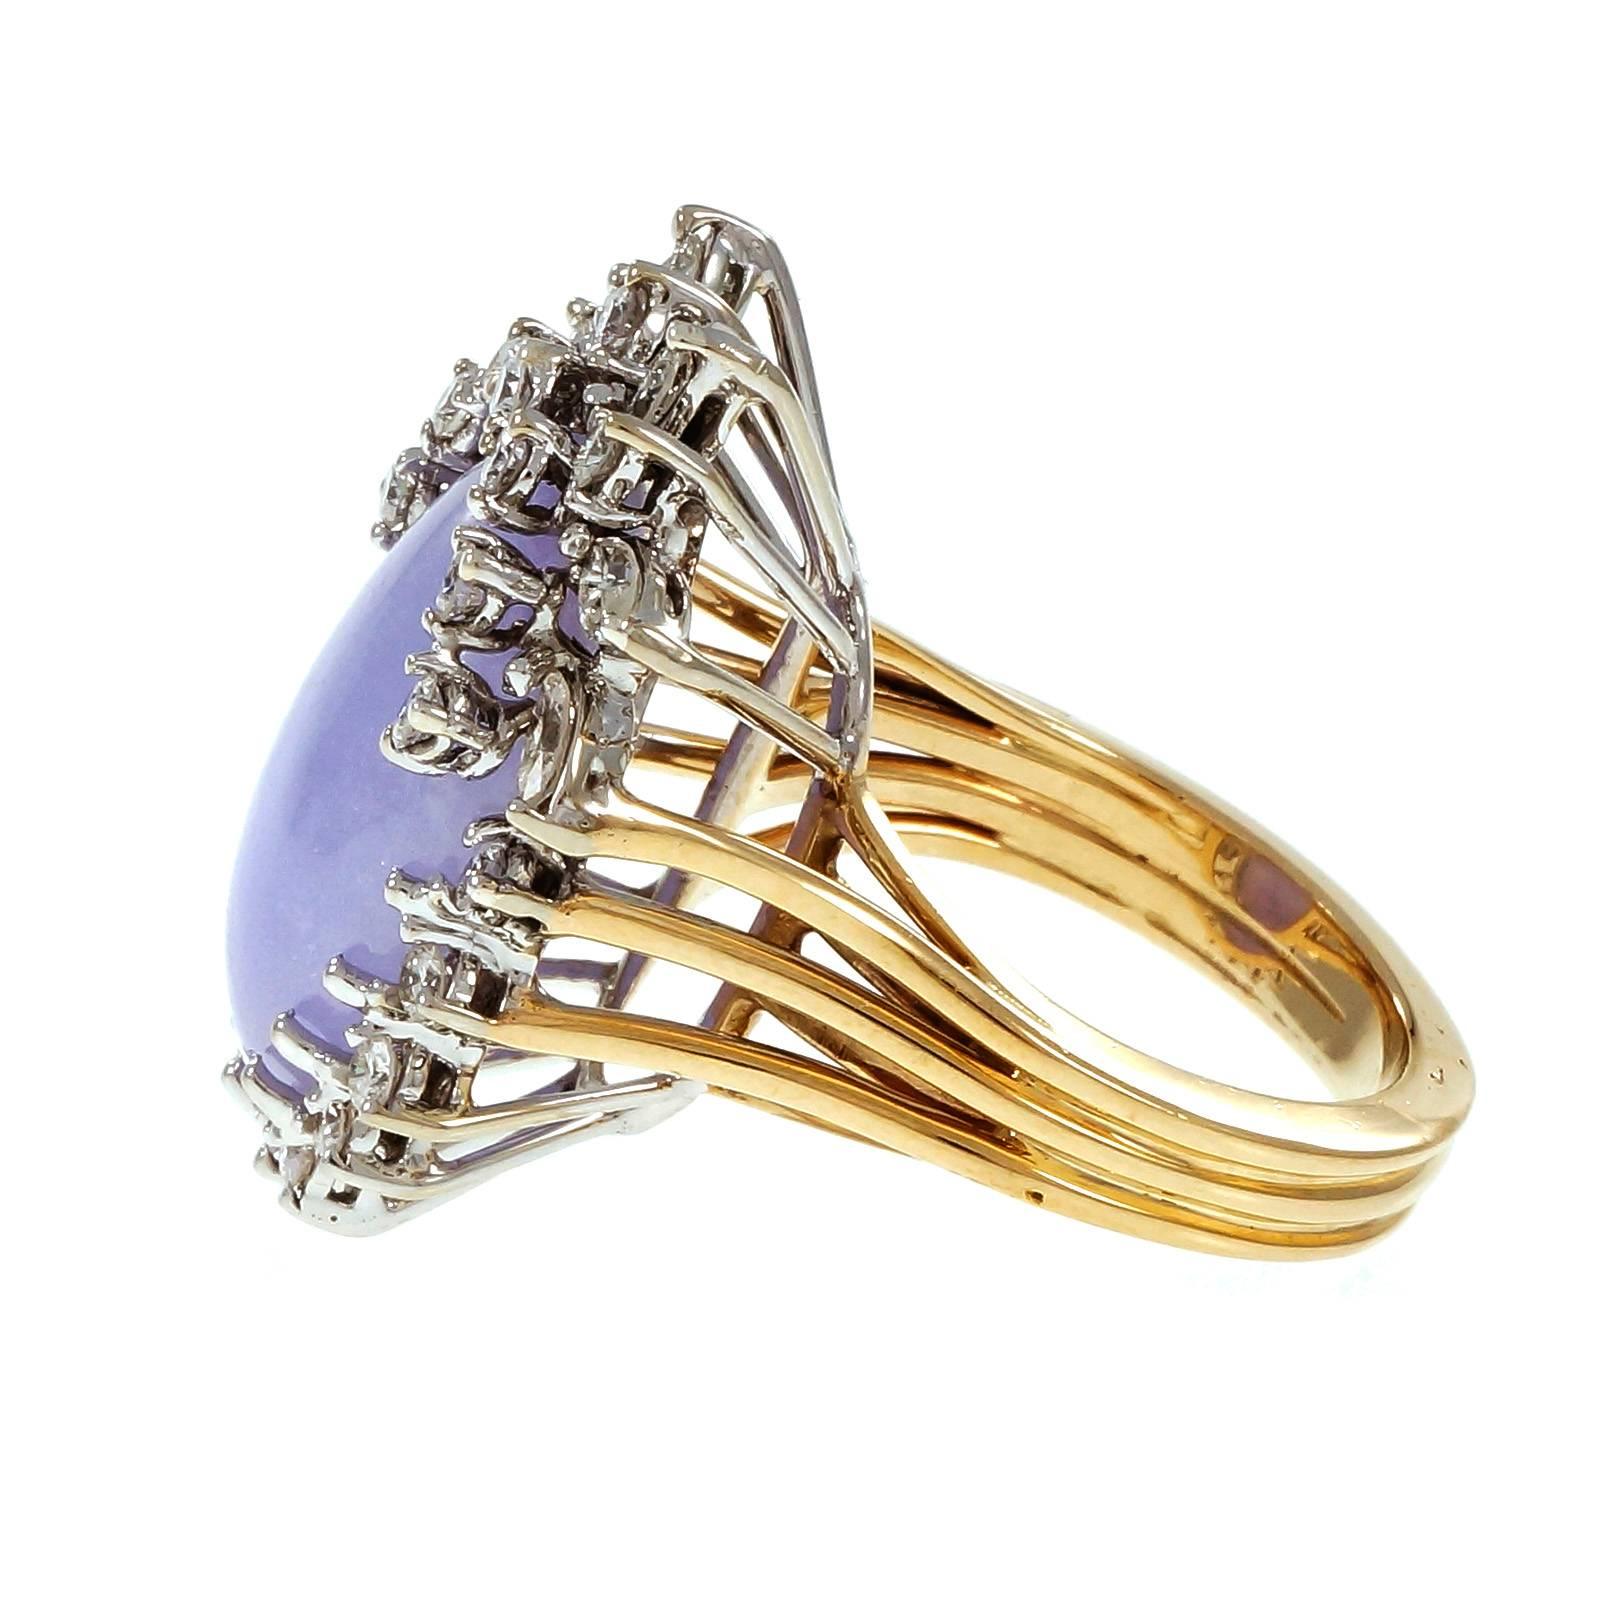 Large natural purple GIA certified oval Jadeite Jade and diamond cocktail ring circa 1950 with round and Marquise diamonds. Handmade ring with yellow gold shank and white gold top.

1 oval translucent purple Jadeite Jade, 19.51 x 15.07 x 6.13mm,